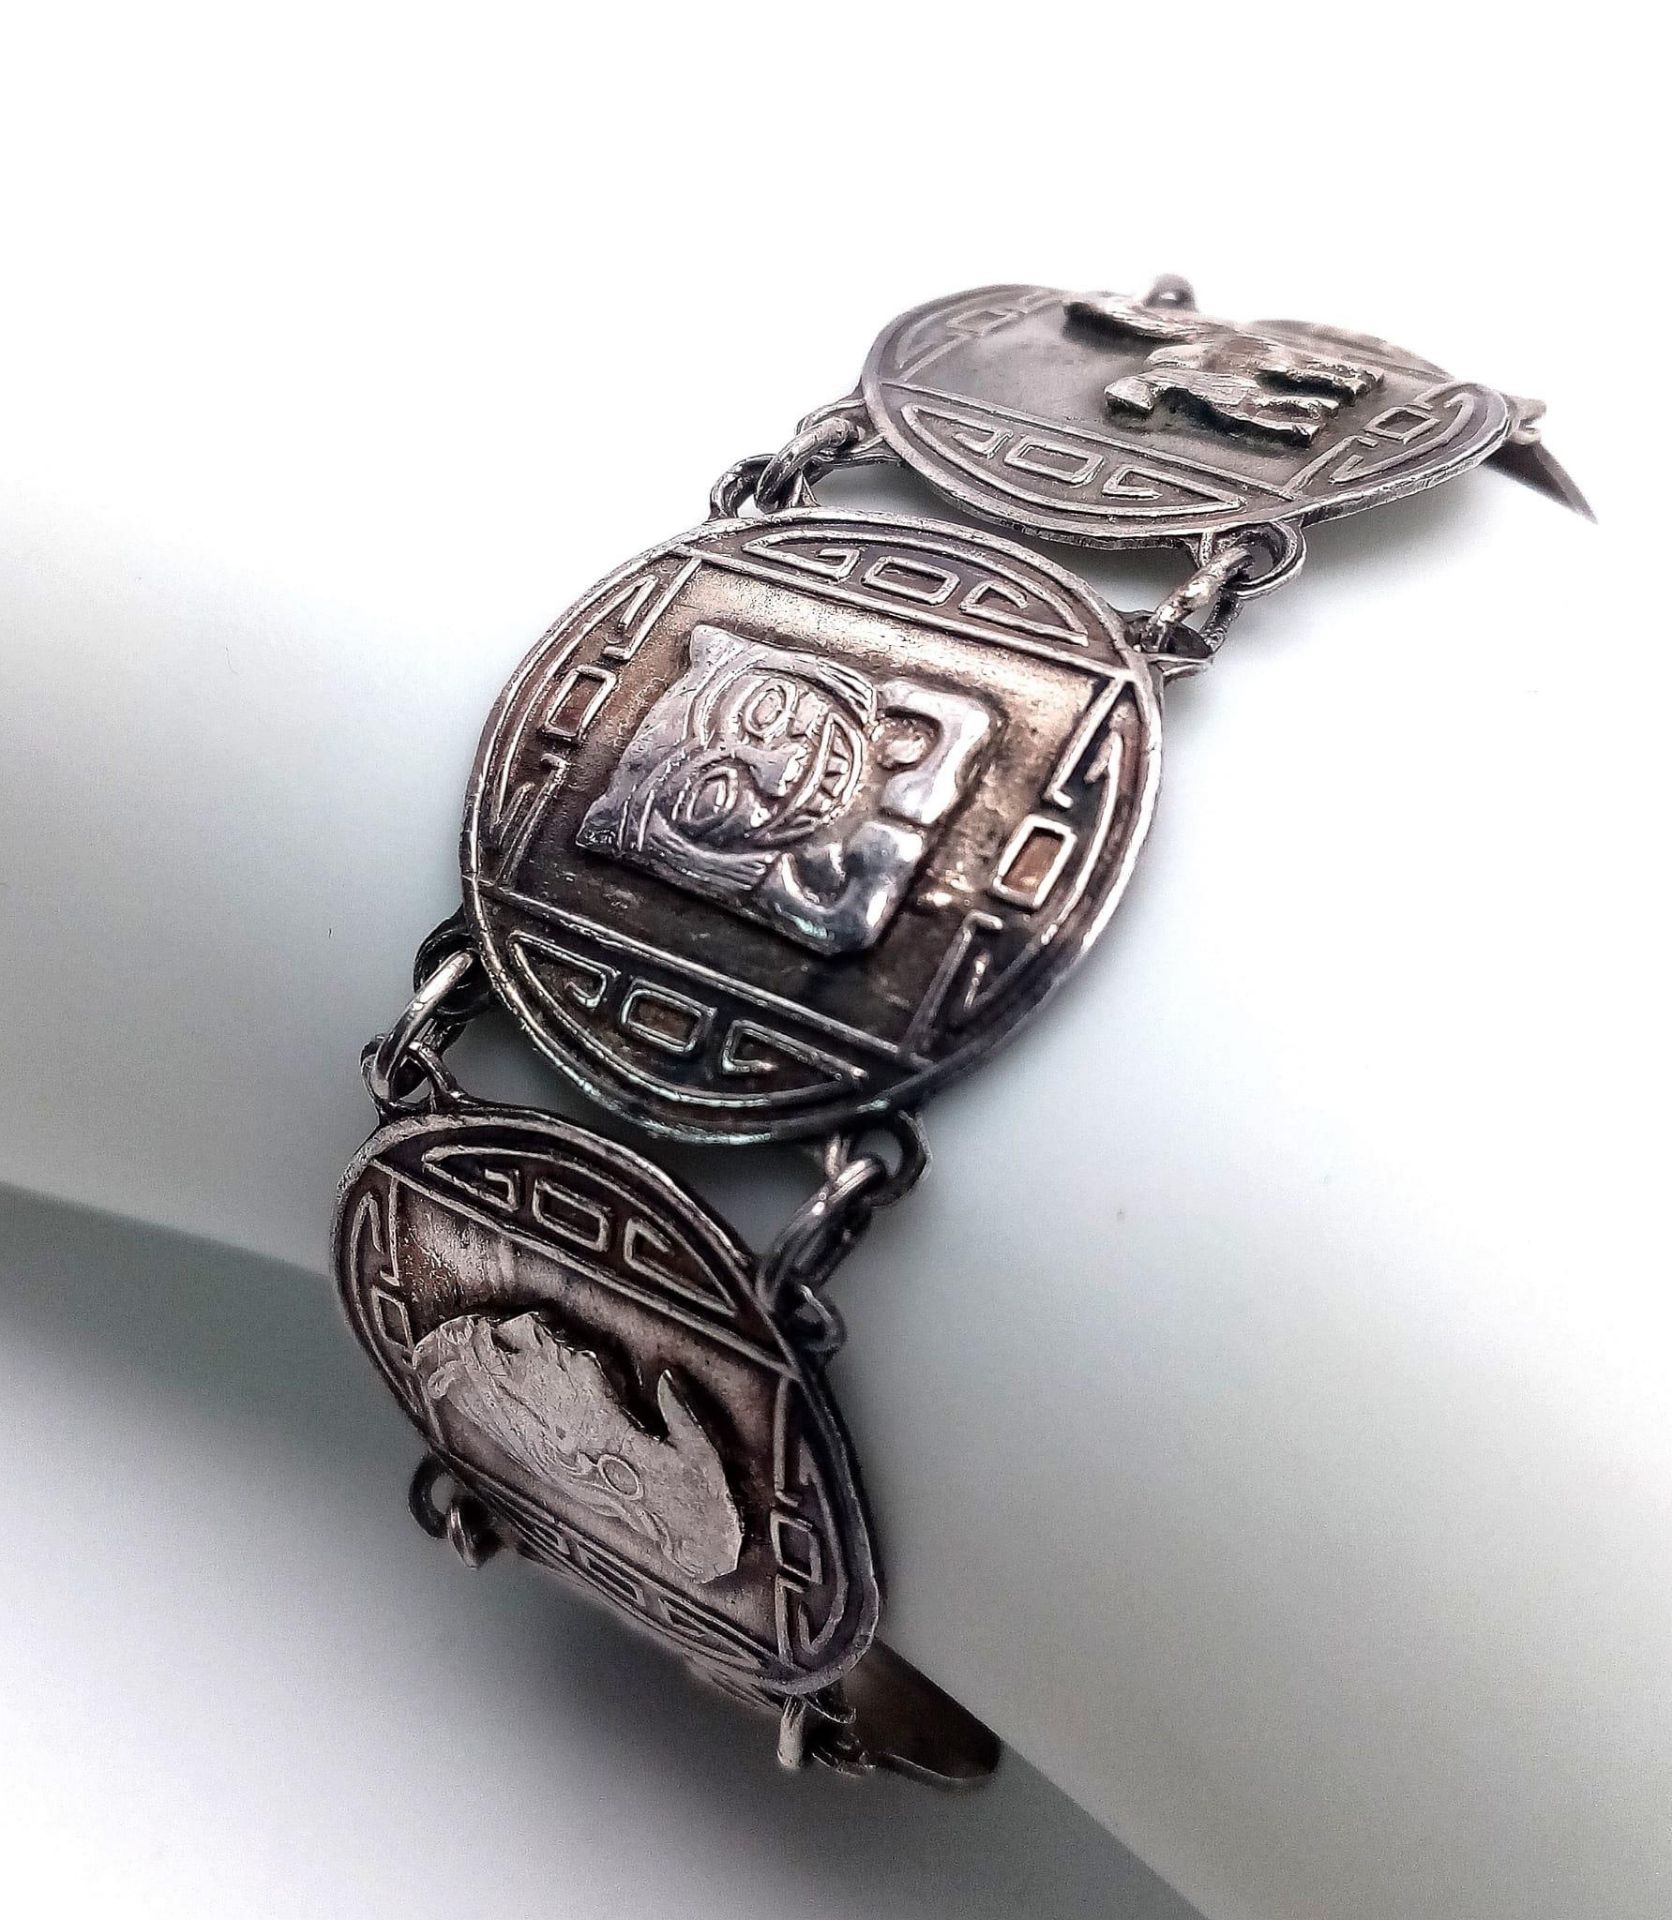 A Silver Fancy Aztec Bracelet with Safety Chain. 19cm length, 26.2g total weight. Ref: 8065